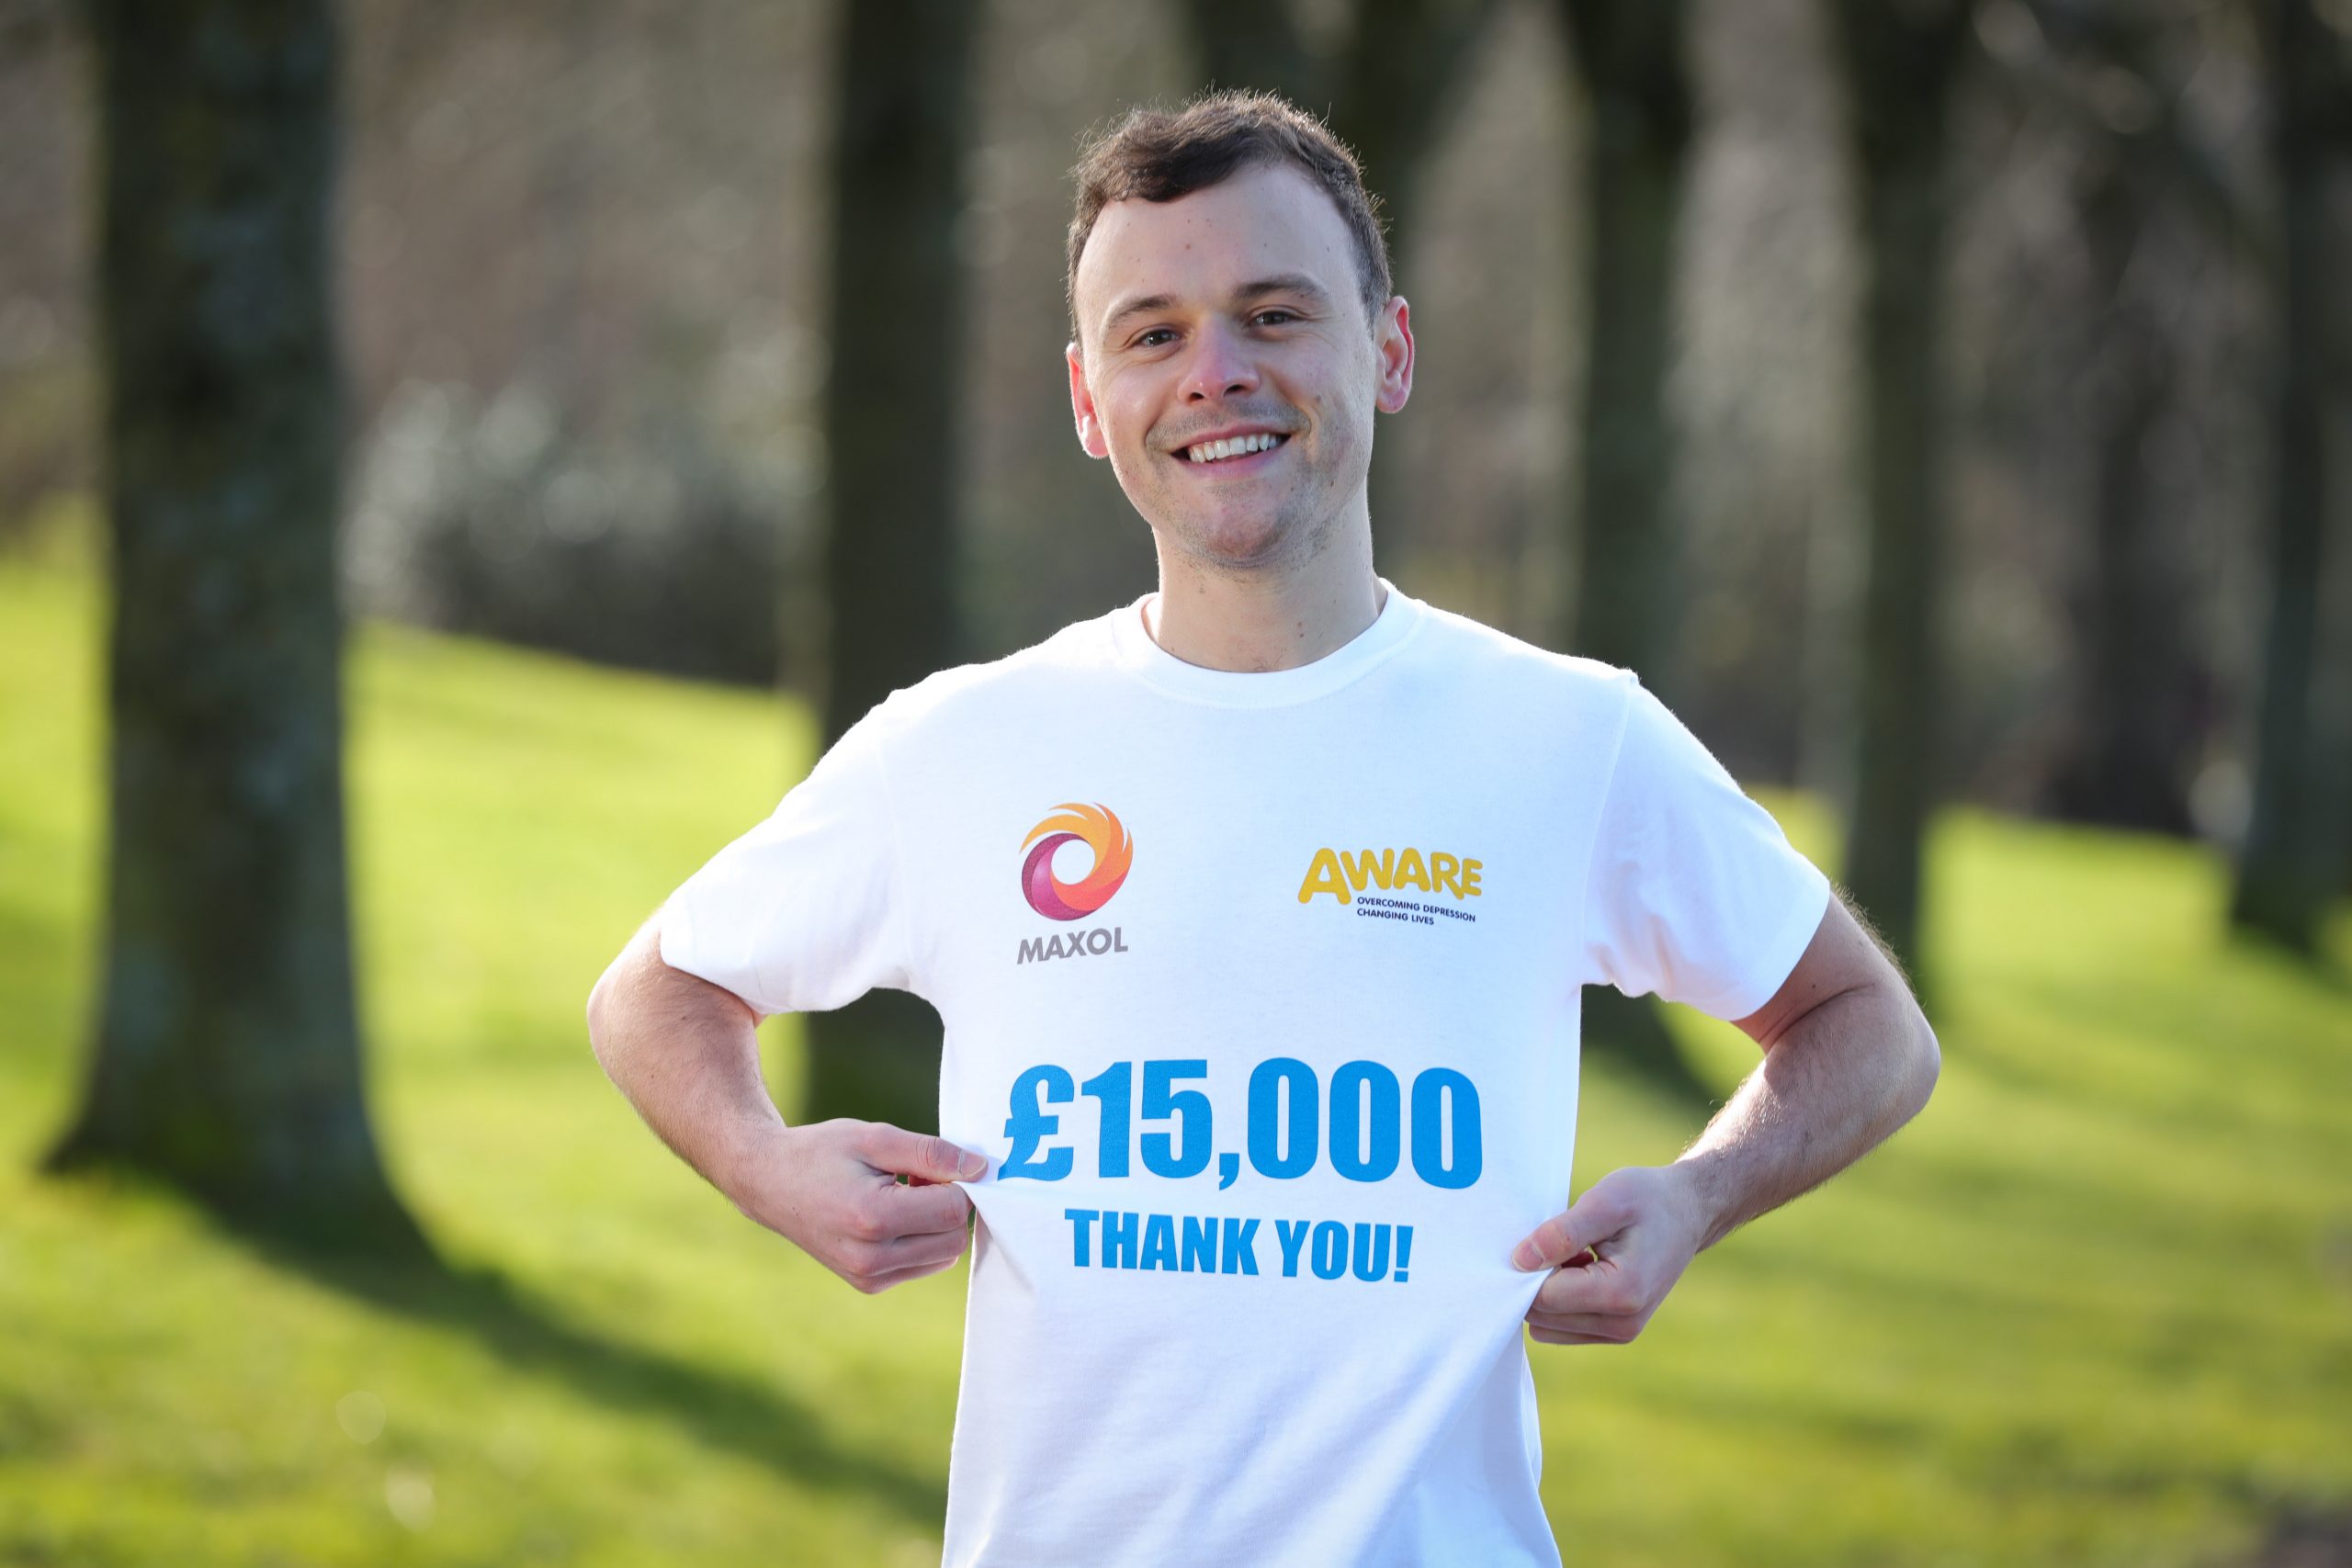 Maxol thanks customers as £15,000 is raised for Charity Partner AWARE